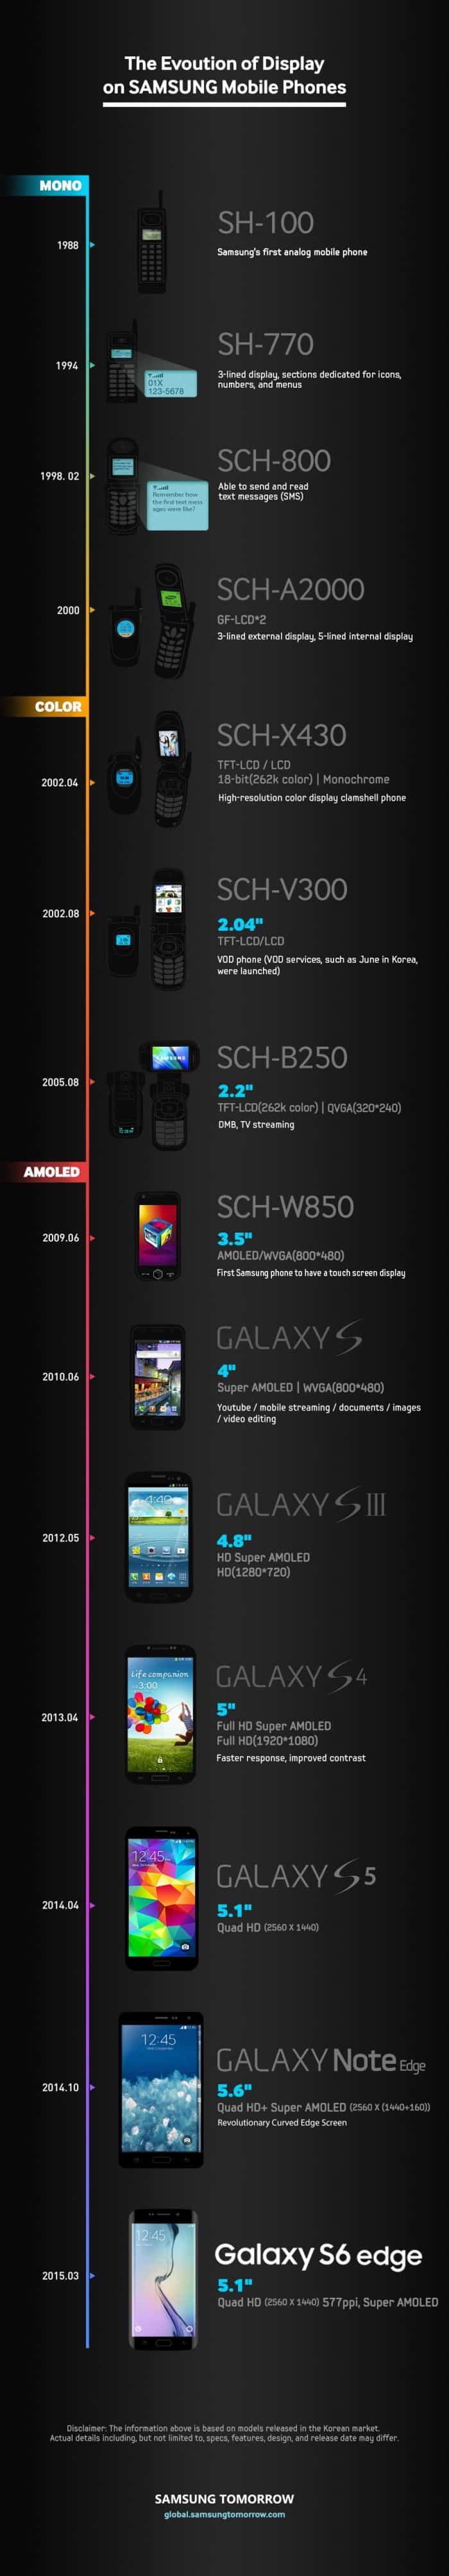 The Evolution of Display screens on Samsung Mobile Phones [infographic] - 5